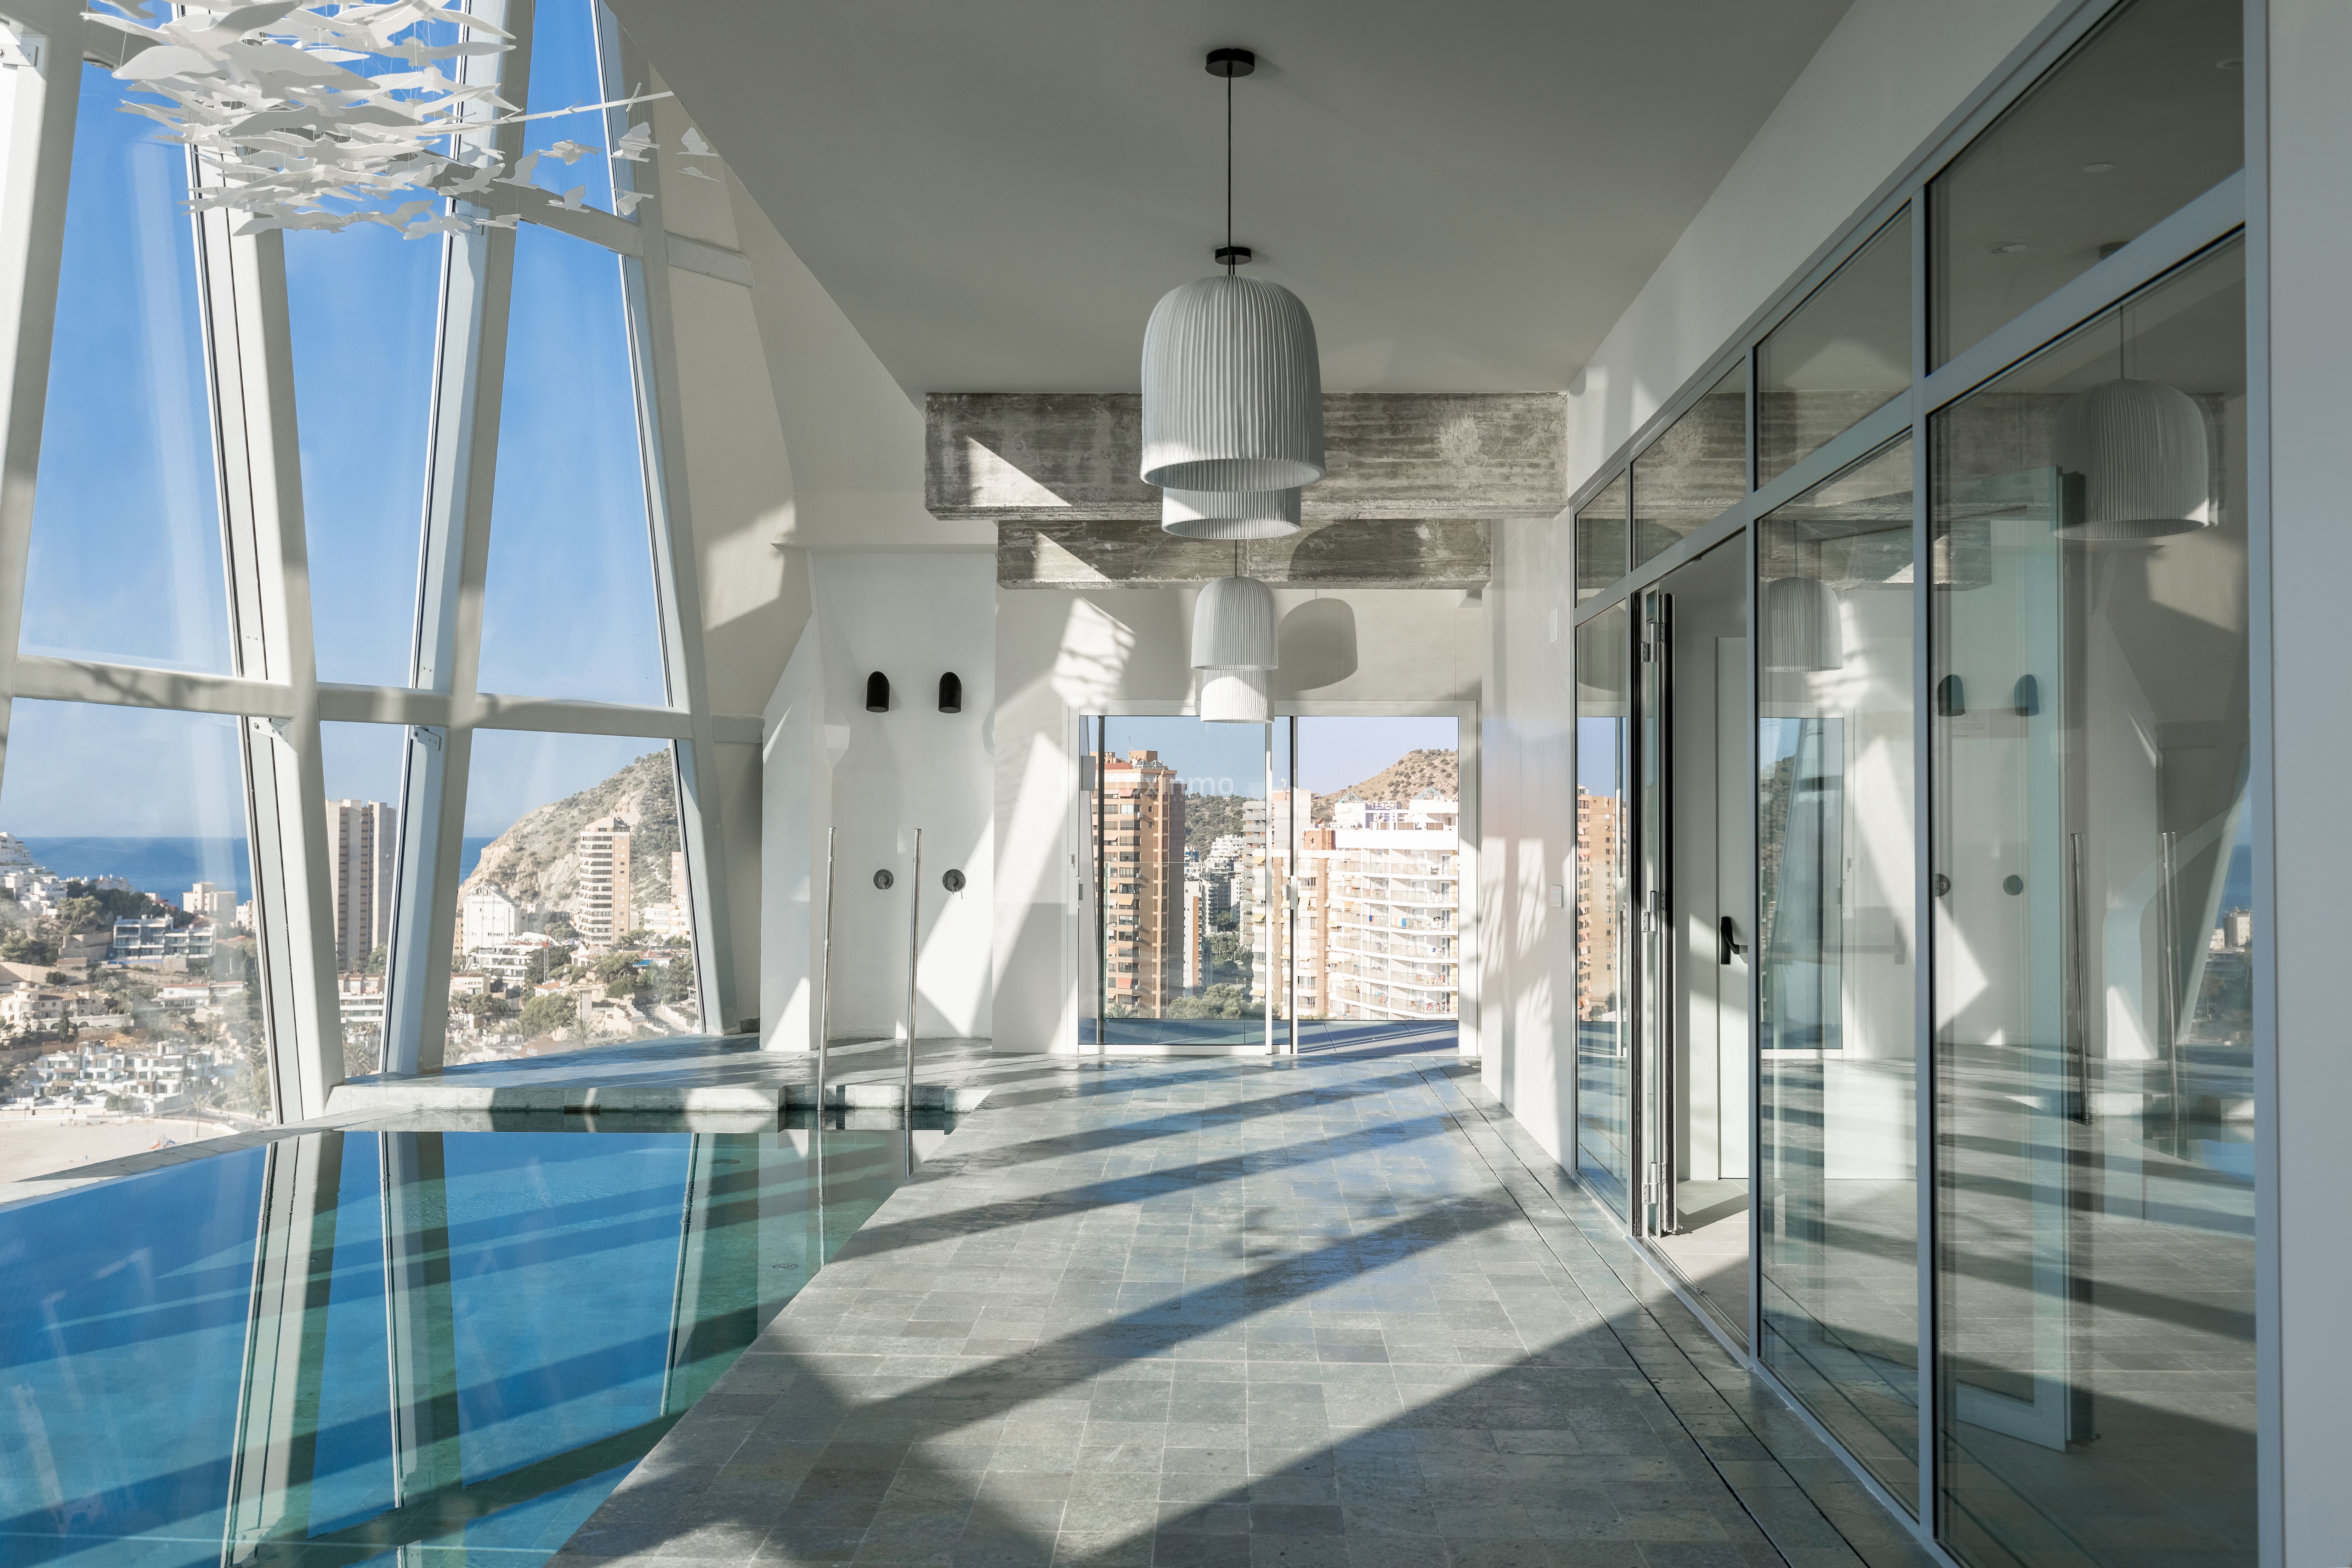 Apartment for sale in Benidorm 26